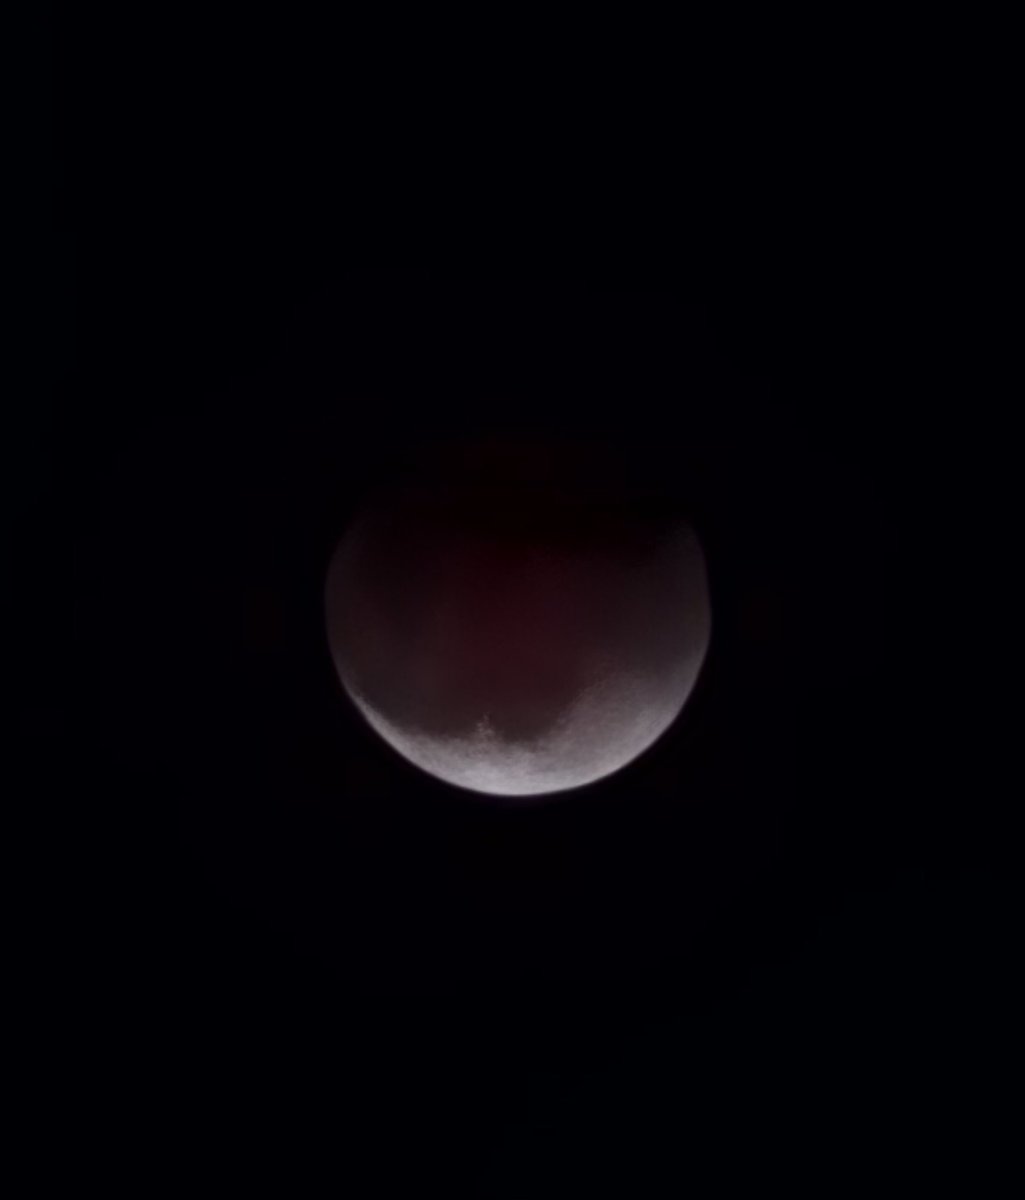 Taken from my new Samsung phone, at 30x zoom. Crazy my phone's camera can take this photo. #EclipseLunar